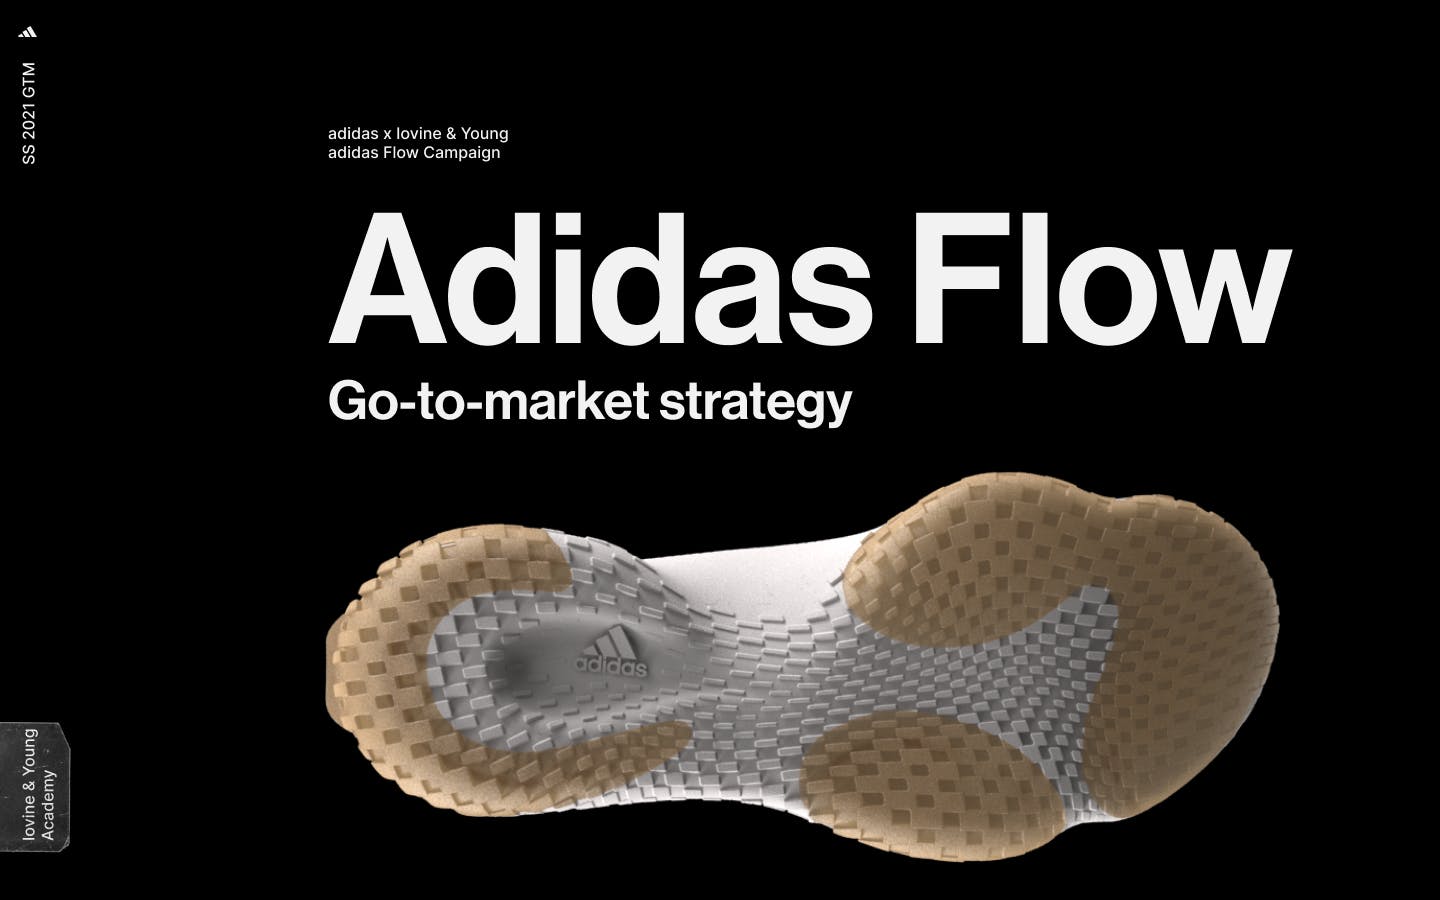 A slide from a marketing pitch showing an image of a shoe